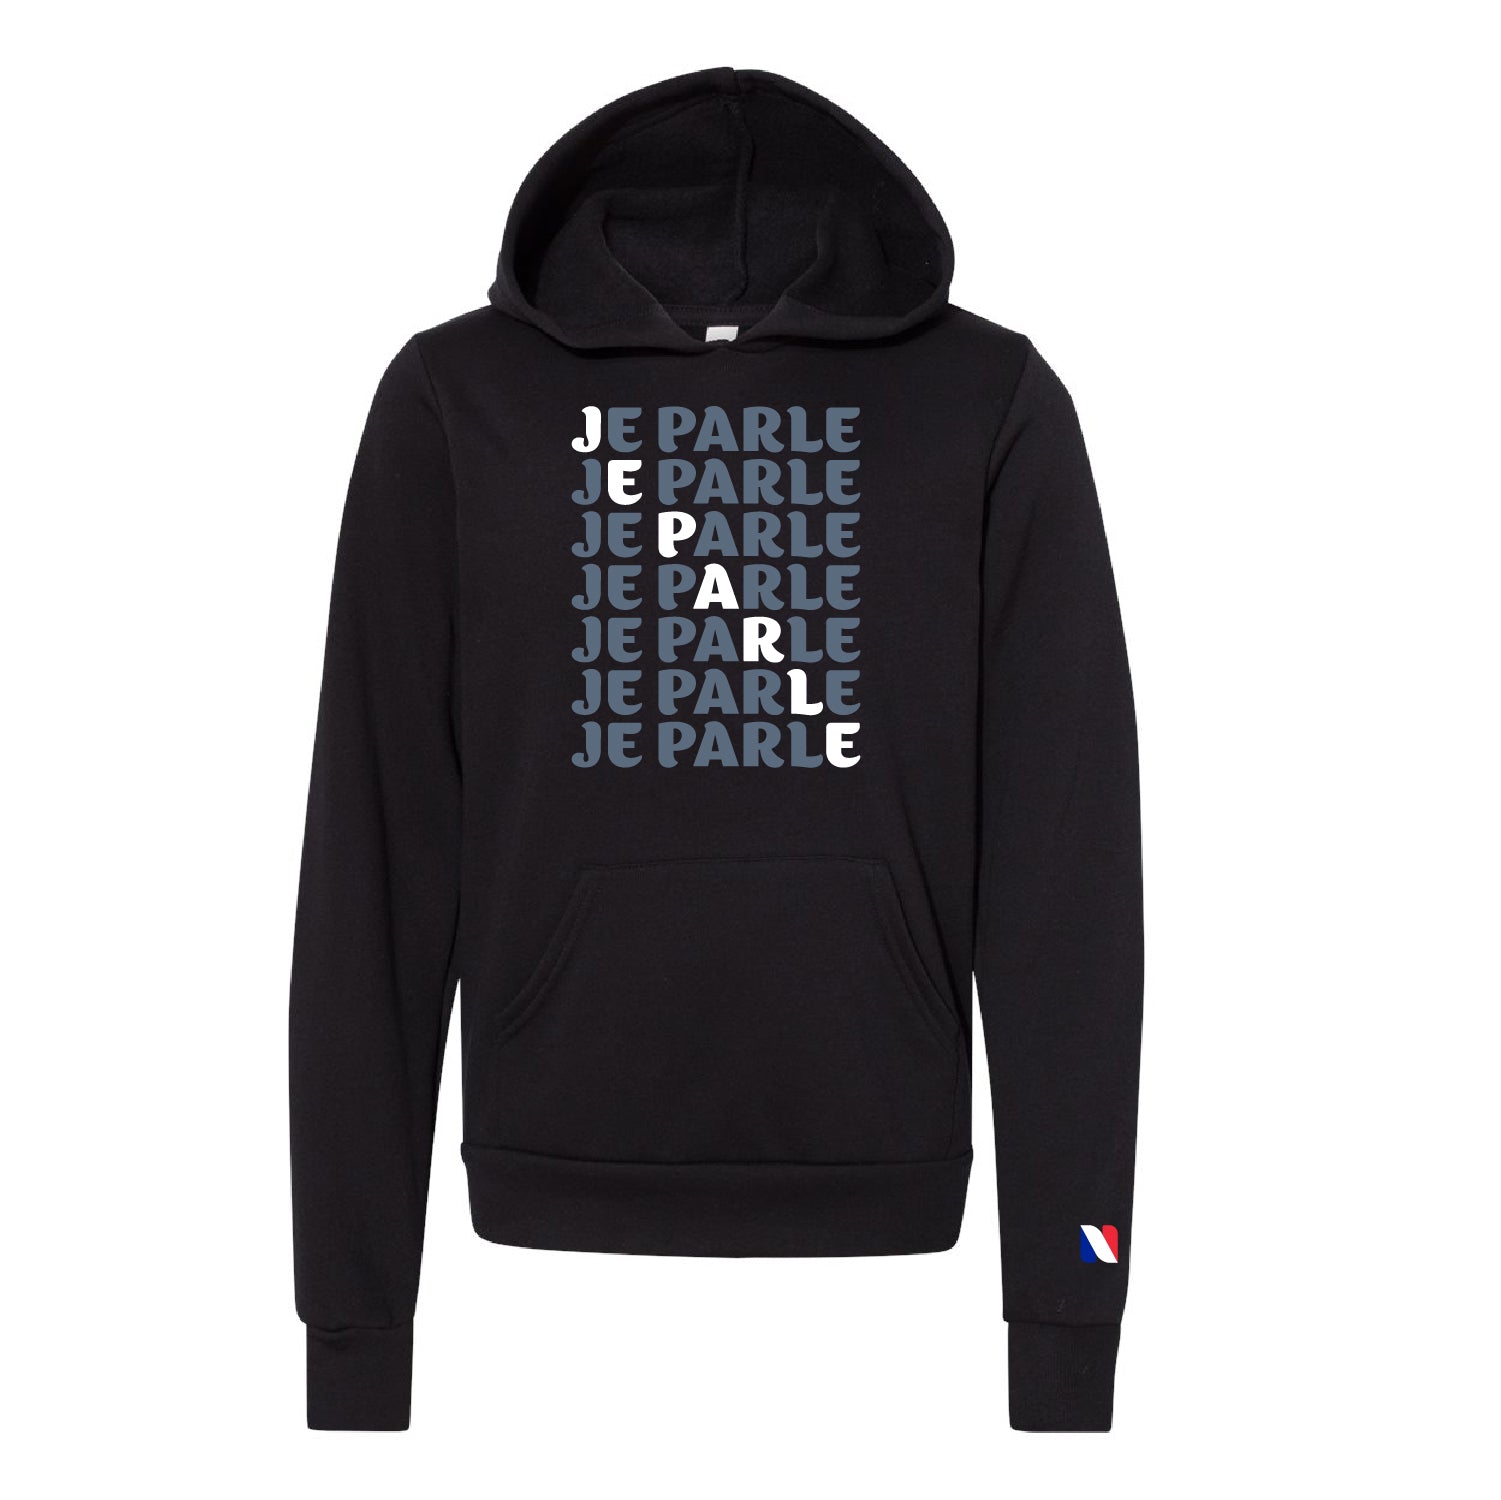 JE PARLE – YOUTH FLEECE HOODIE - DSP On Demand